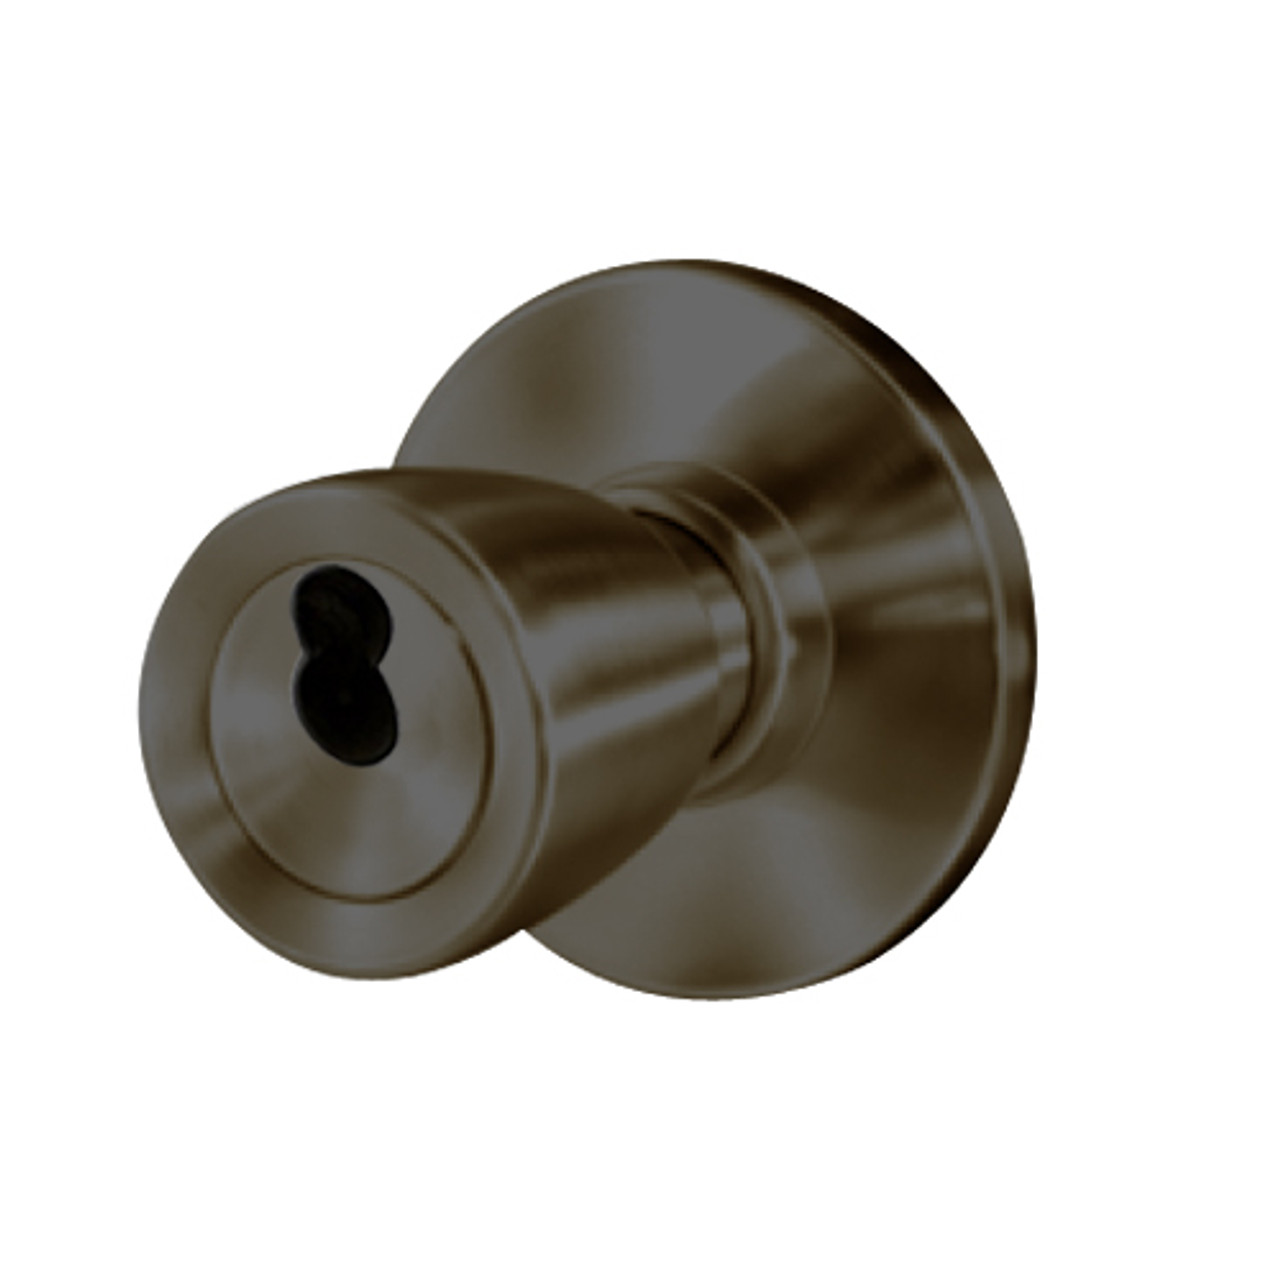 8K37C6AS3613 Best 8K Series Apartment Heavy Duty Cylindrical Knob Locks with Tulip Style in Oil Rubbed Bronze